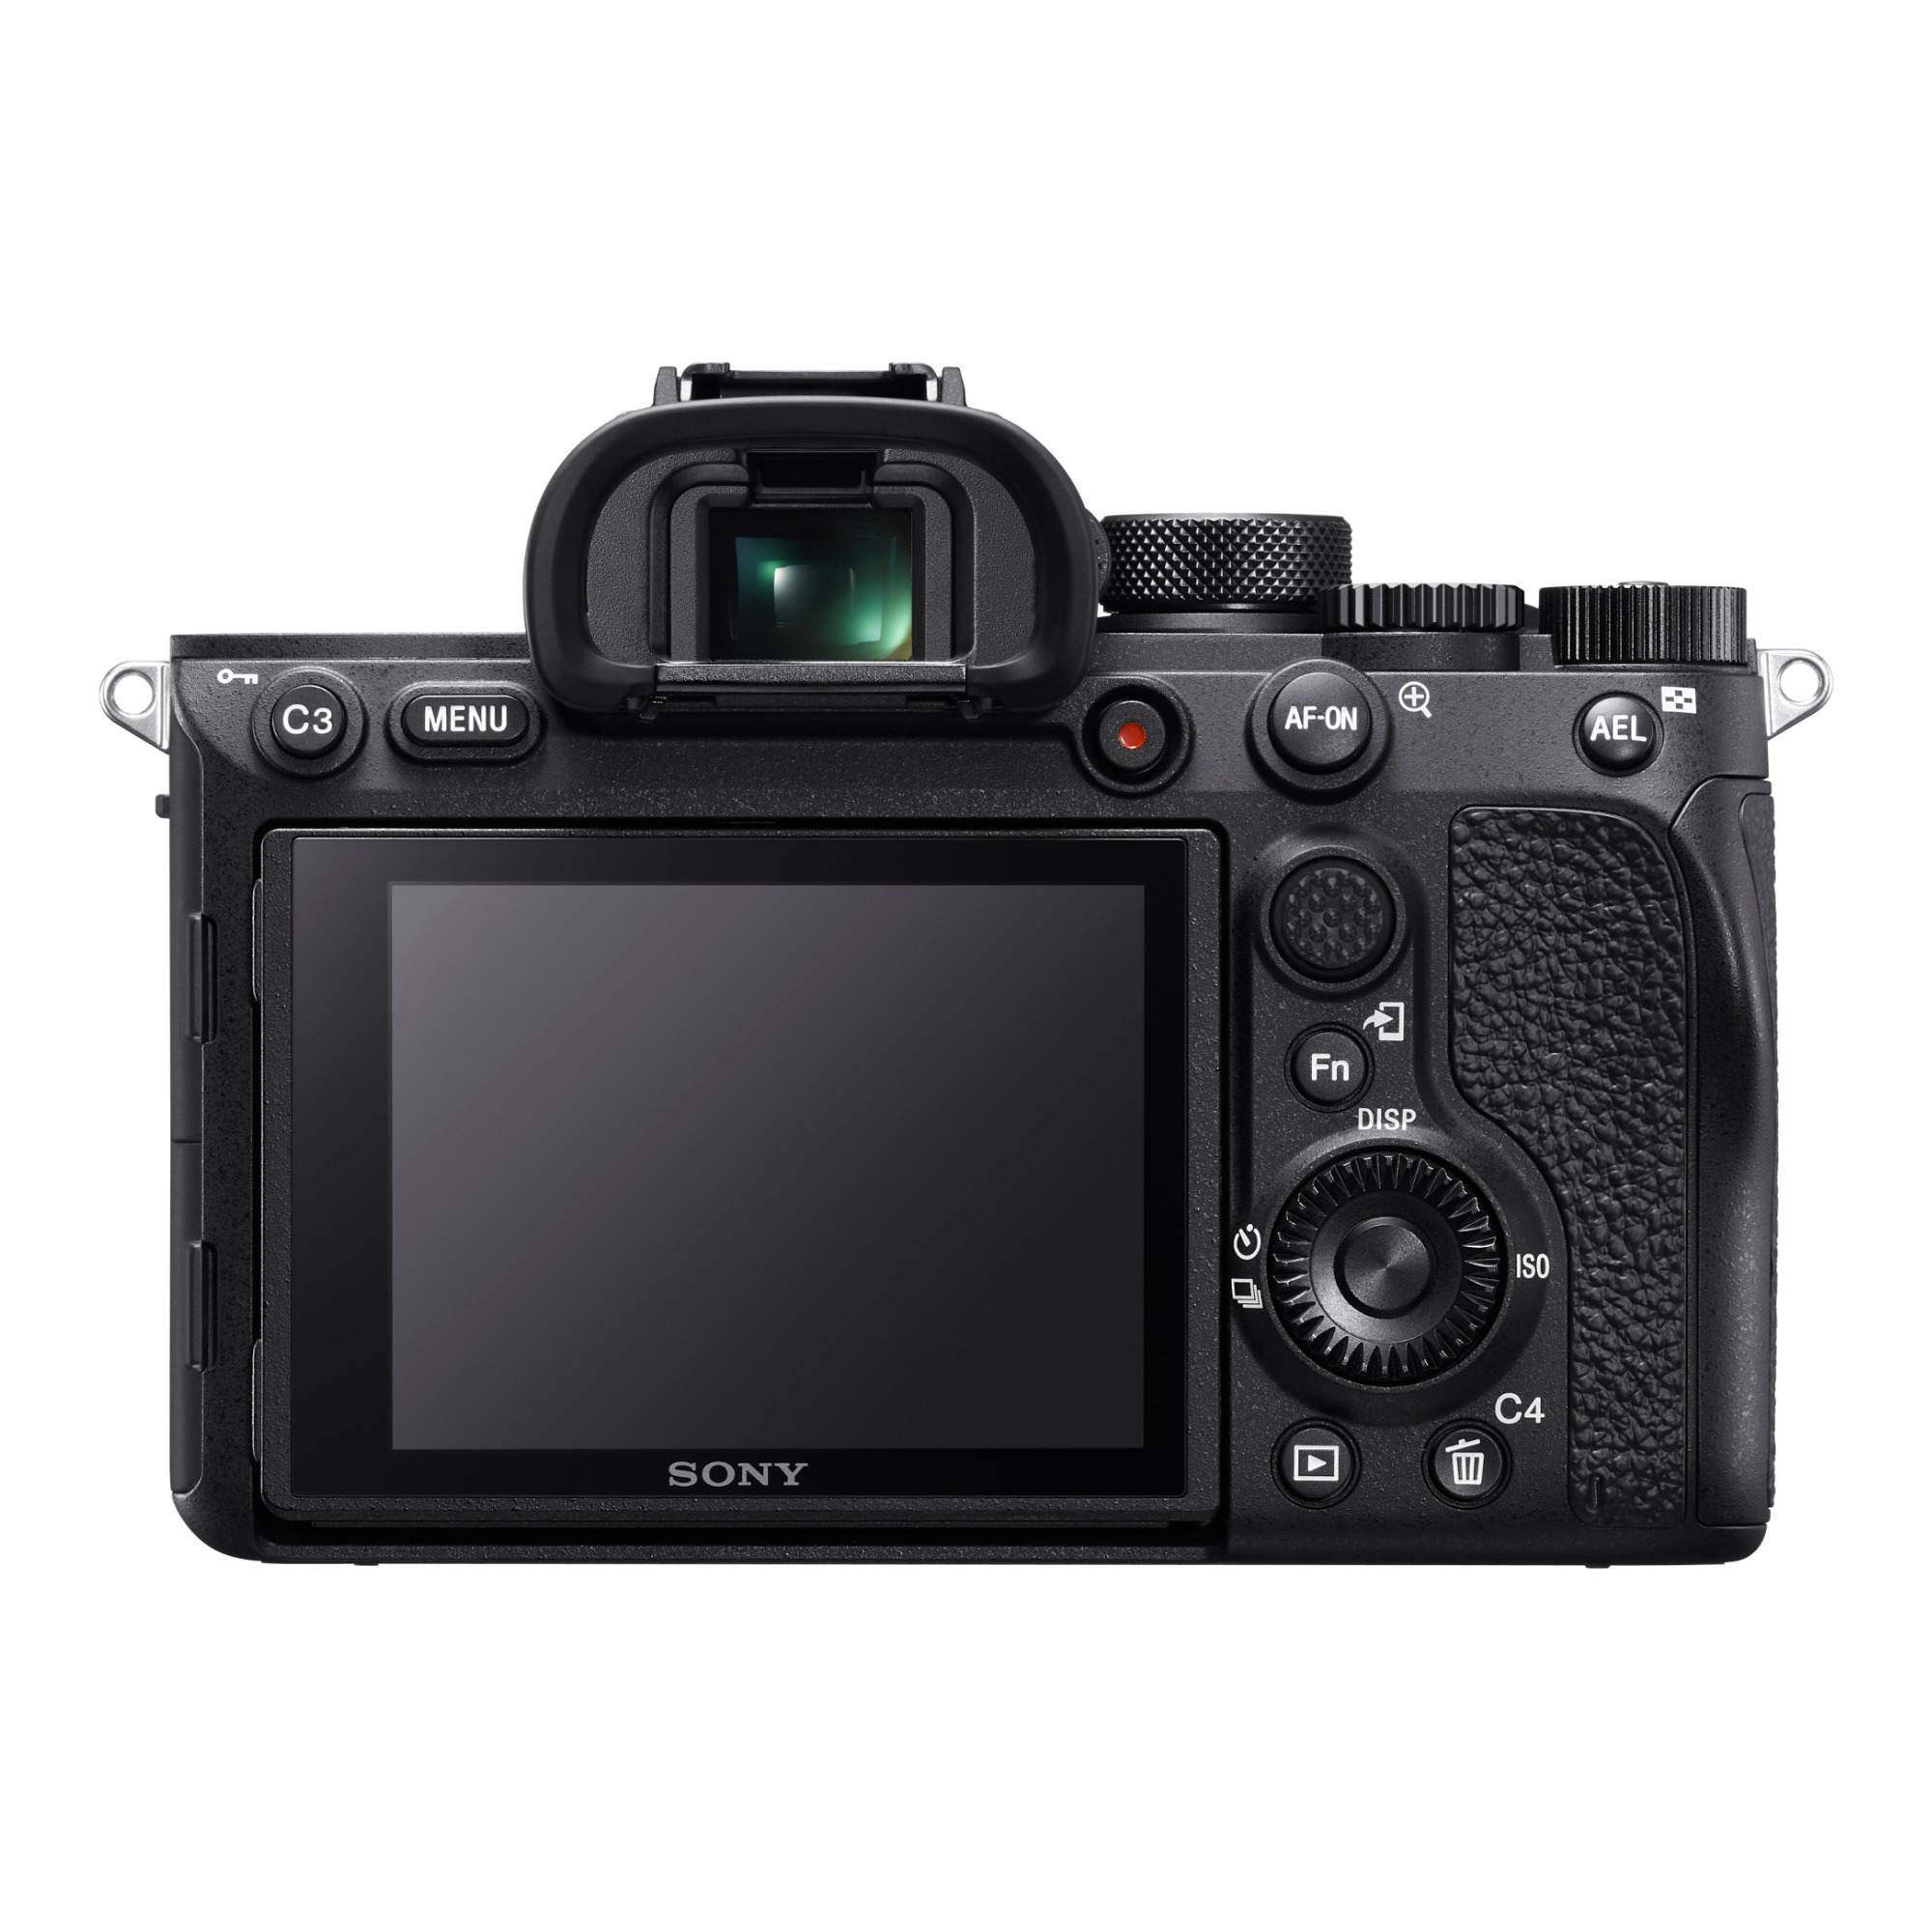 Sony a7R IV ILCE-7RM4 - Digital camera - mirrorless - 61 MP - 4K / 30 fps - body only - NFC, Wi-Fi, Bluetooth - black - image 2 of 22